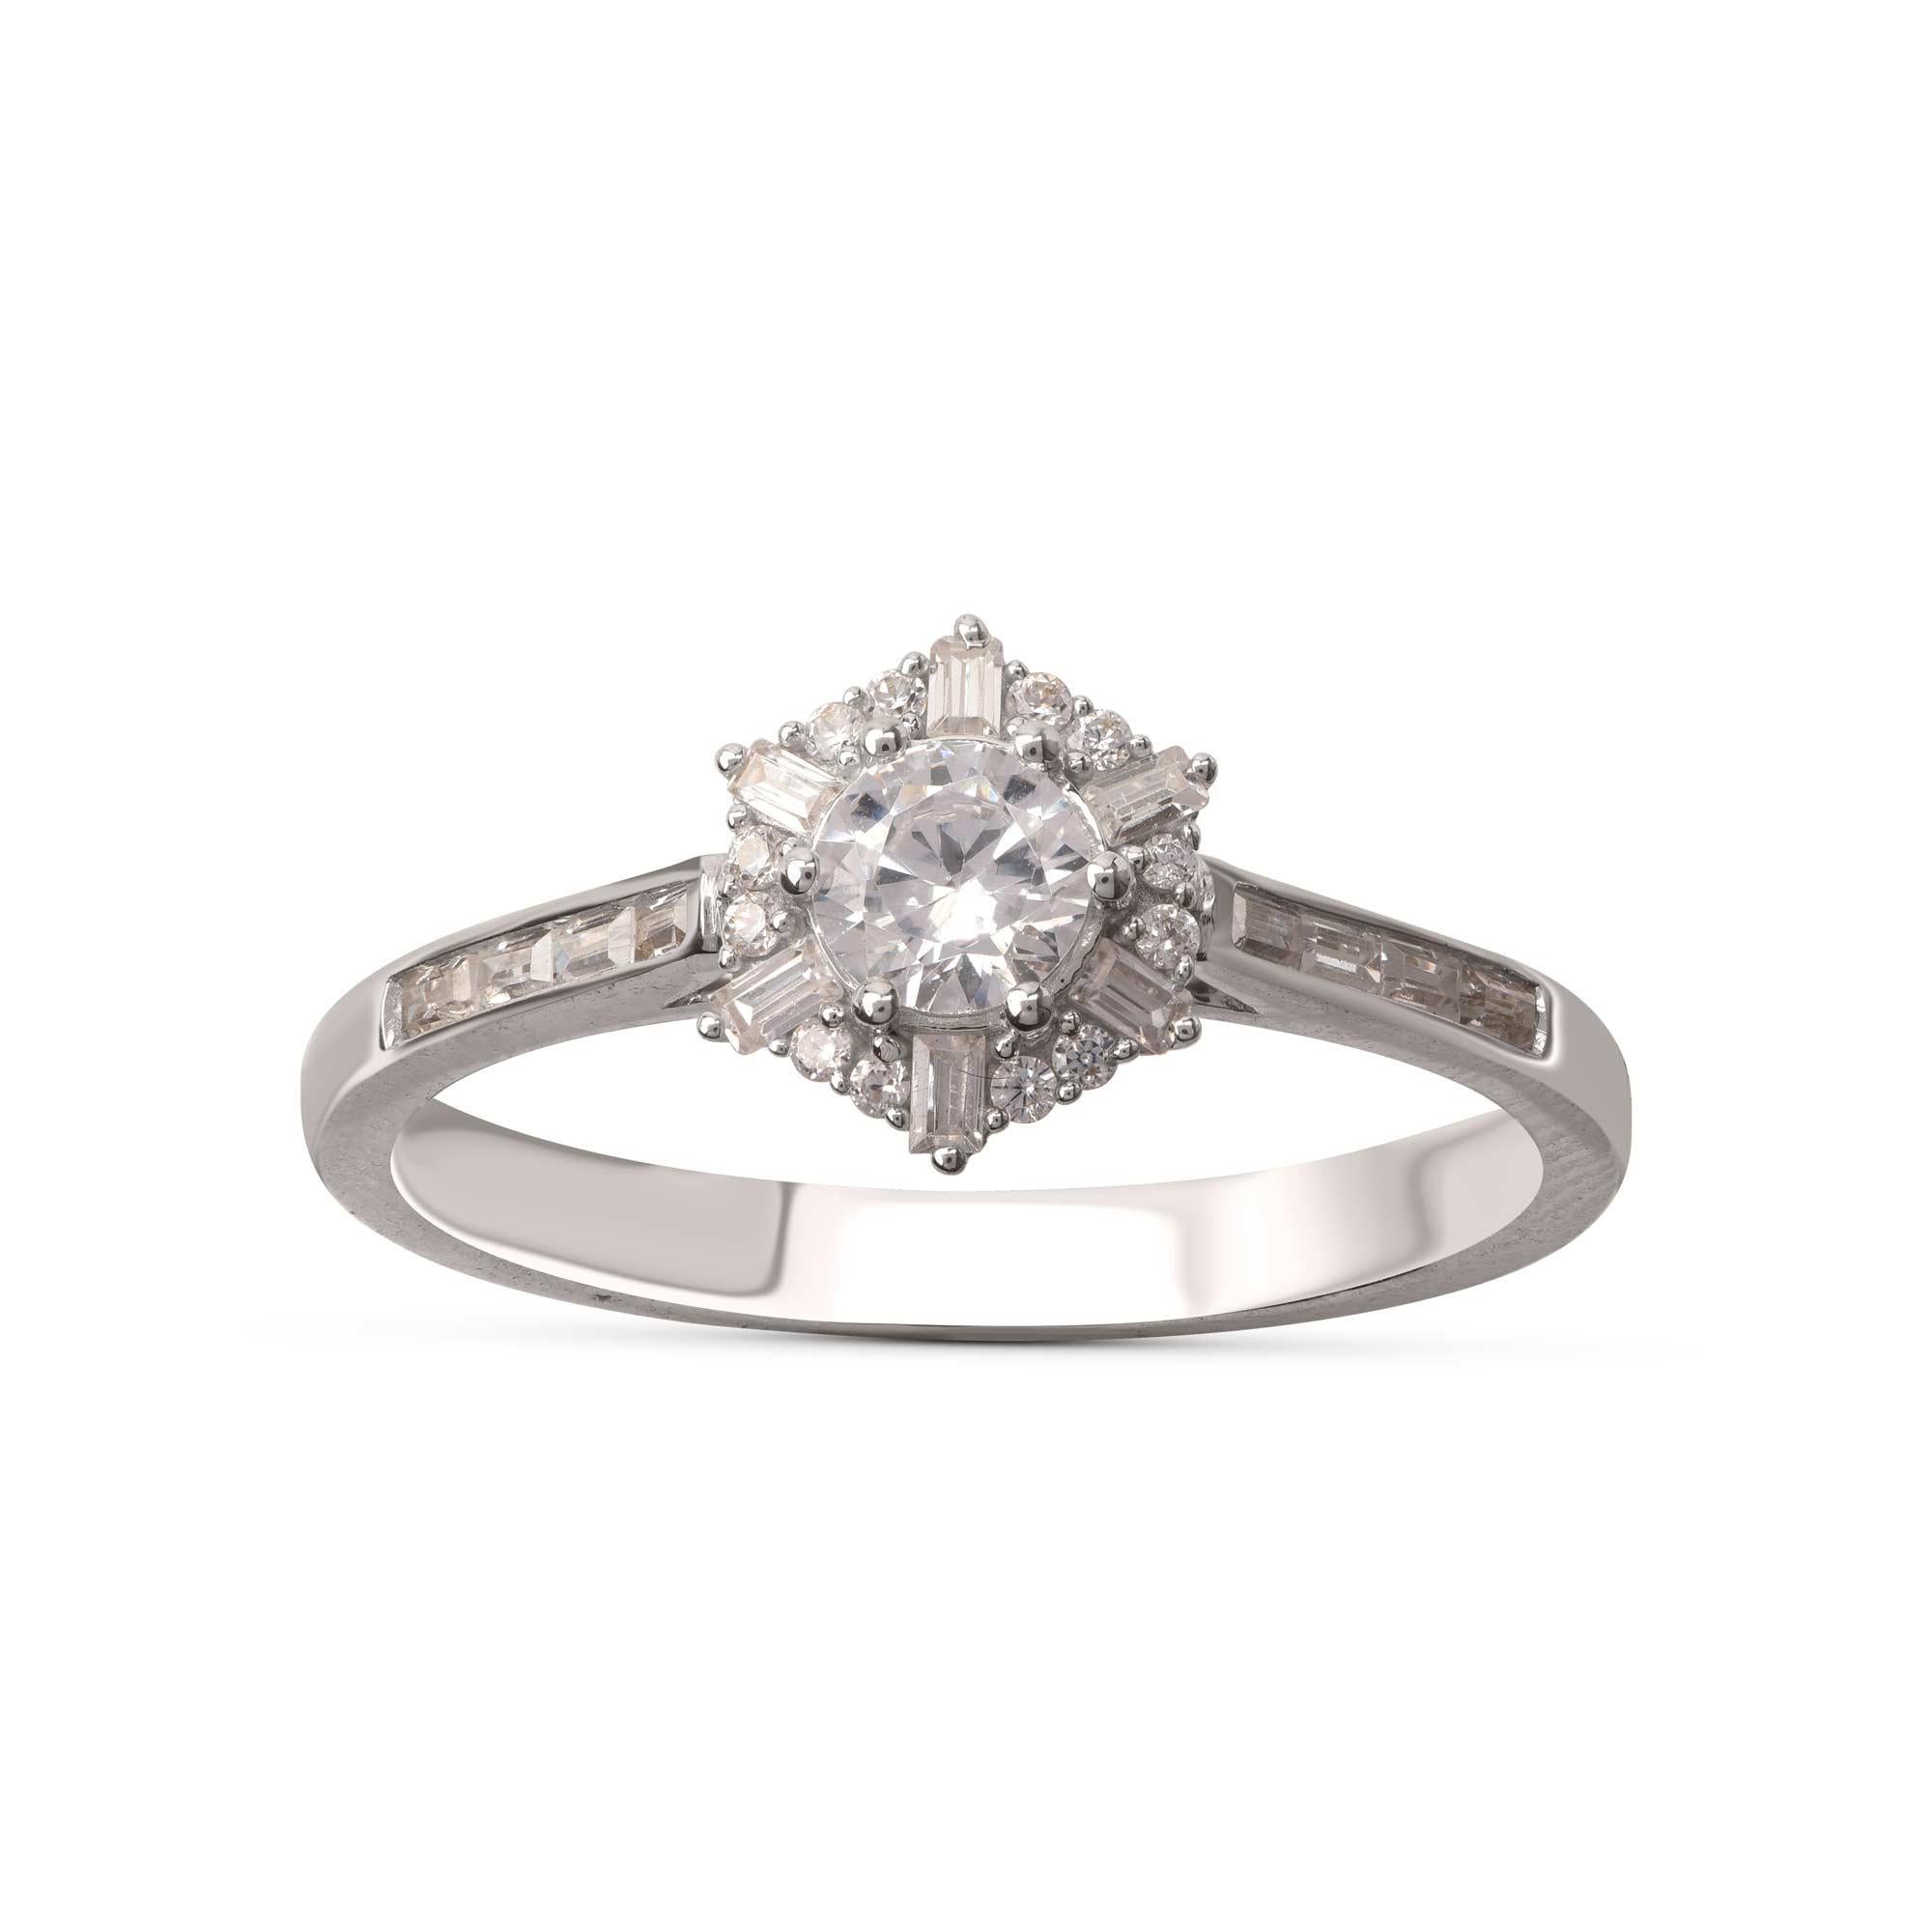 Exquisitely designed in 18-karat white gold and dazzling with 13 brilliant cut and 14 baguette shape diamonds embedded beautifully in channel and prong setting. The diamonds are graded H Color, I1 Clarity. 

Metal color and ring size can be